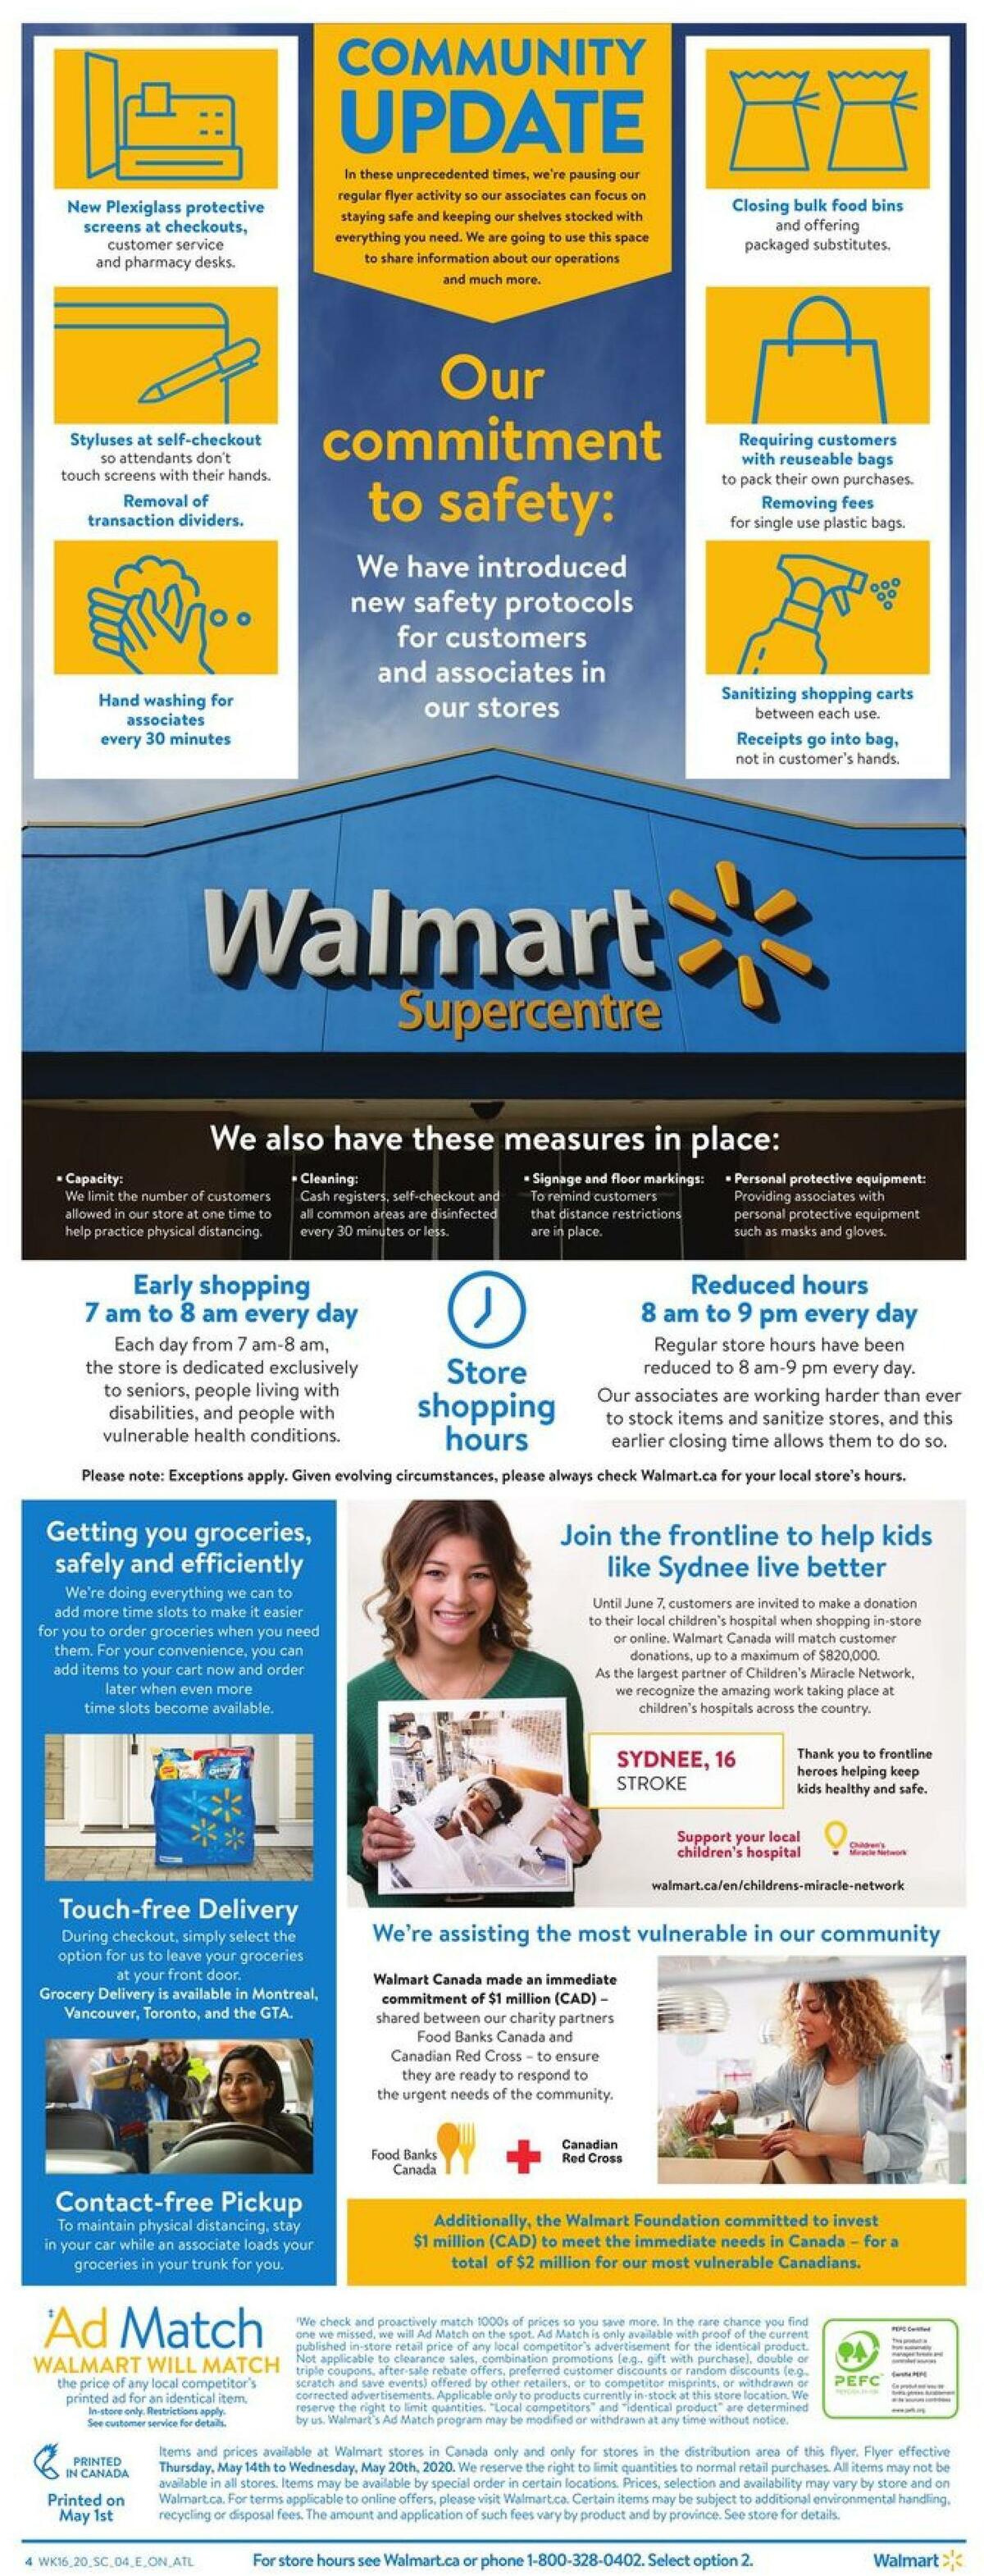 Walmart Flyer from May 14